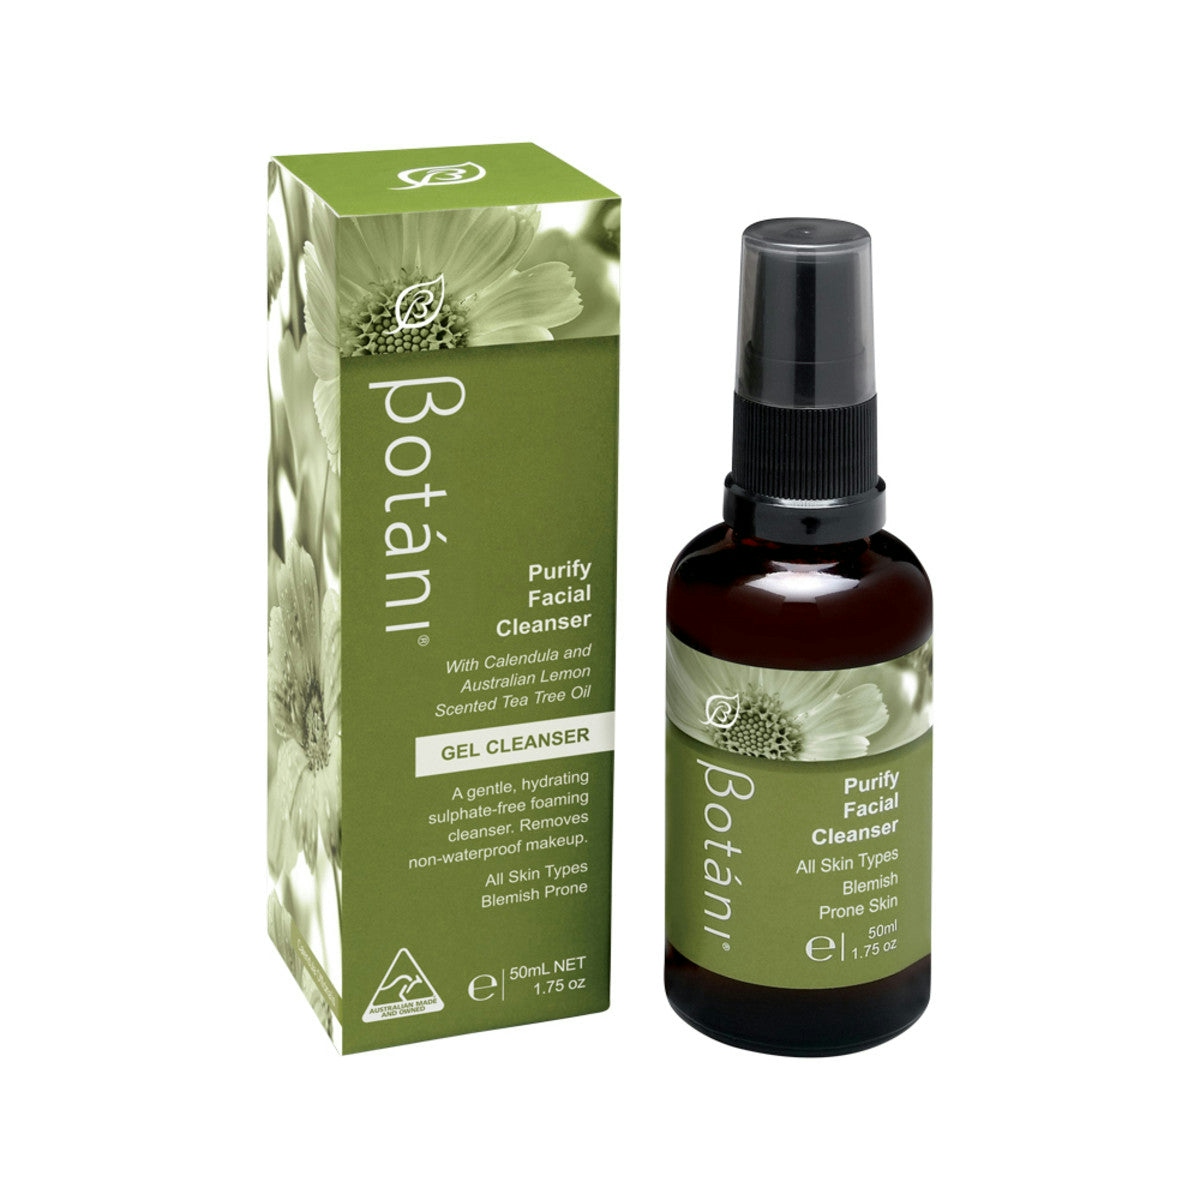 image of Botani Purify Facial Cleanser 50ml on white background